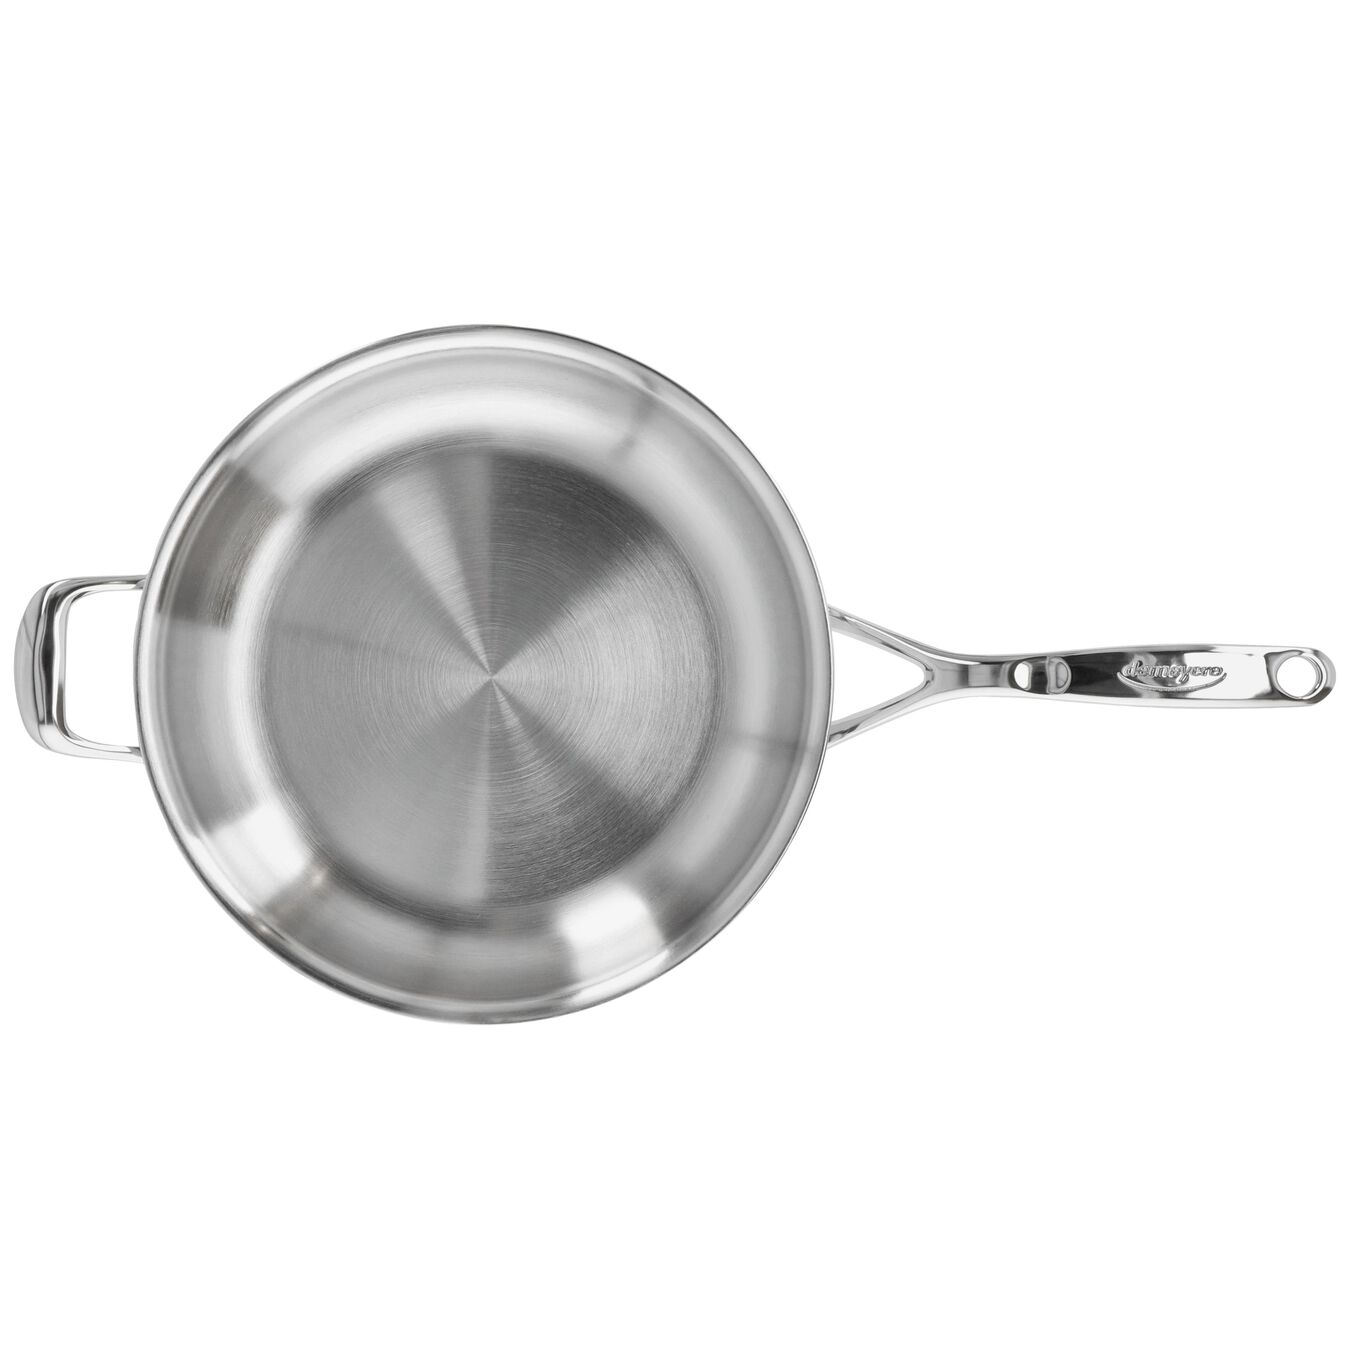 11-inch, 18/10 Stainless Steel, Proline Fry Pan with Helper Handle,,large 3